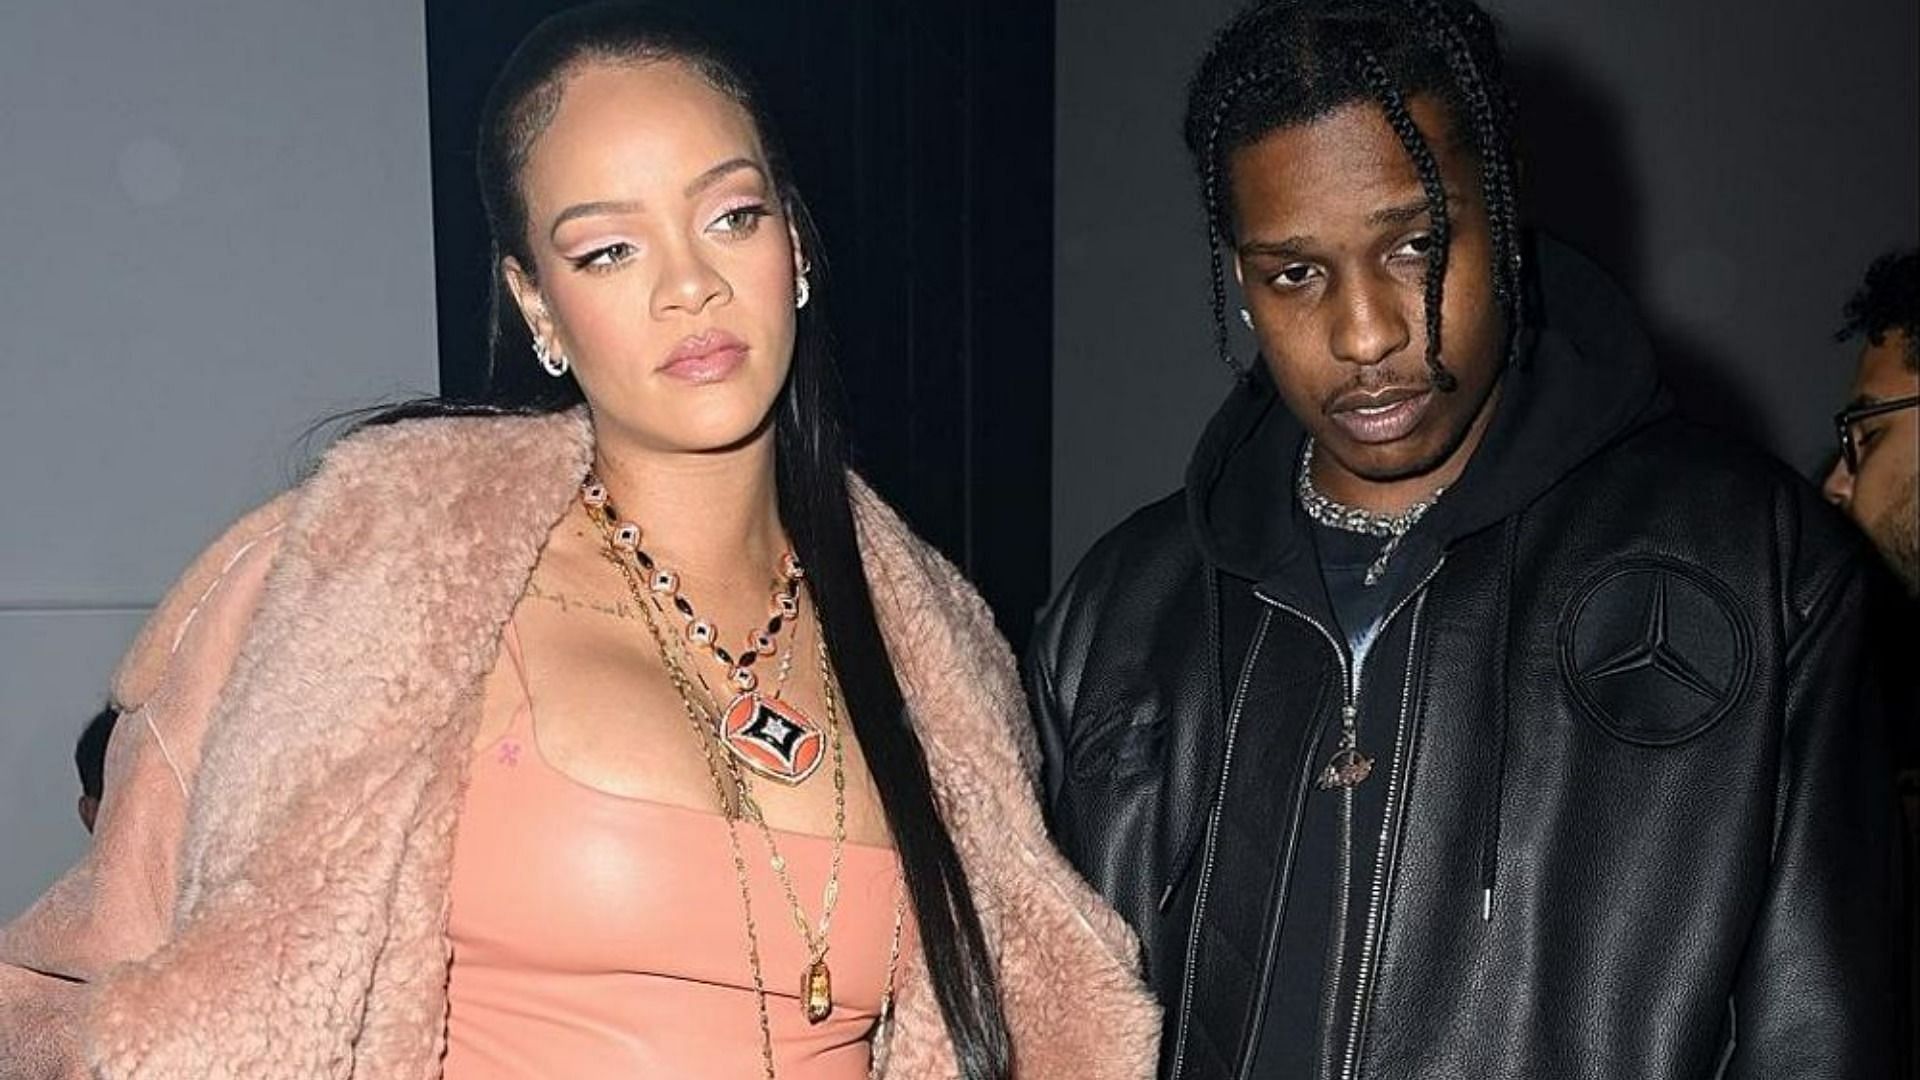 Rihanna and ASAP Rocky rumored to split up after the latter cheats with Fenty shoe designer (Image via Getty Images)